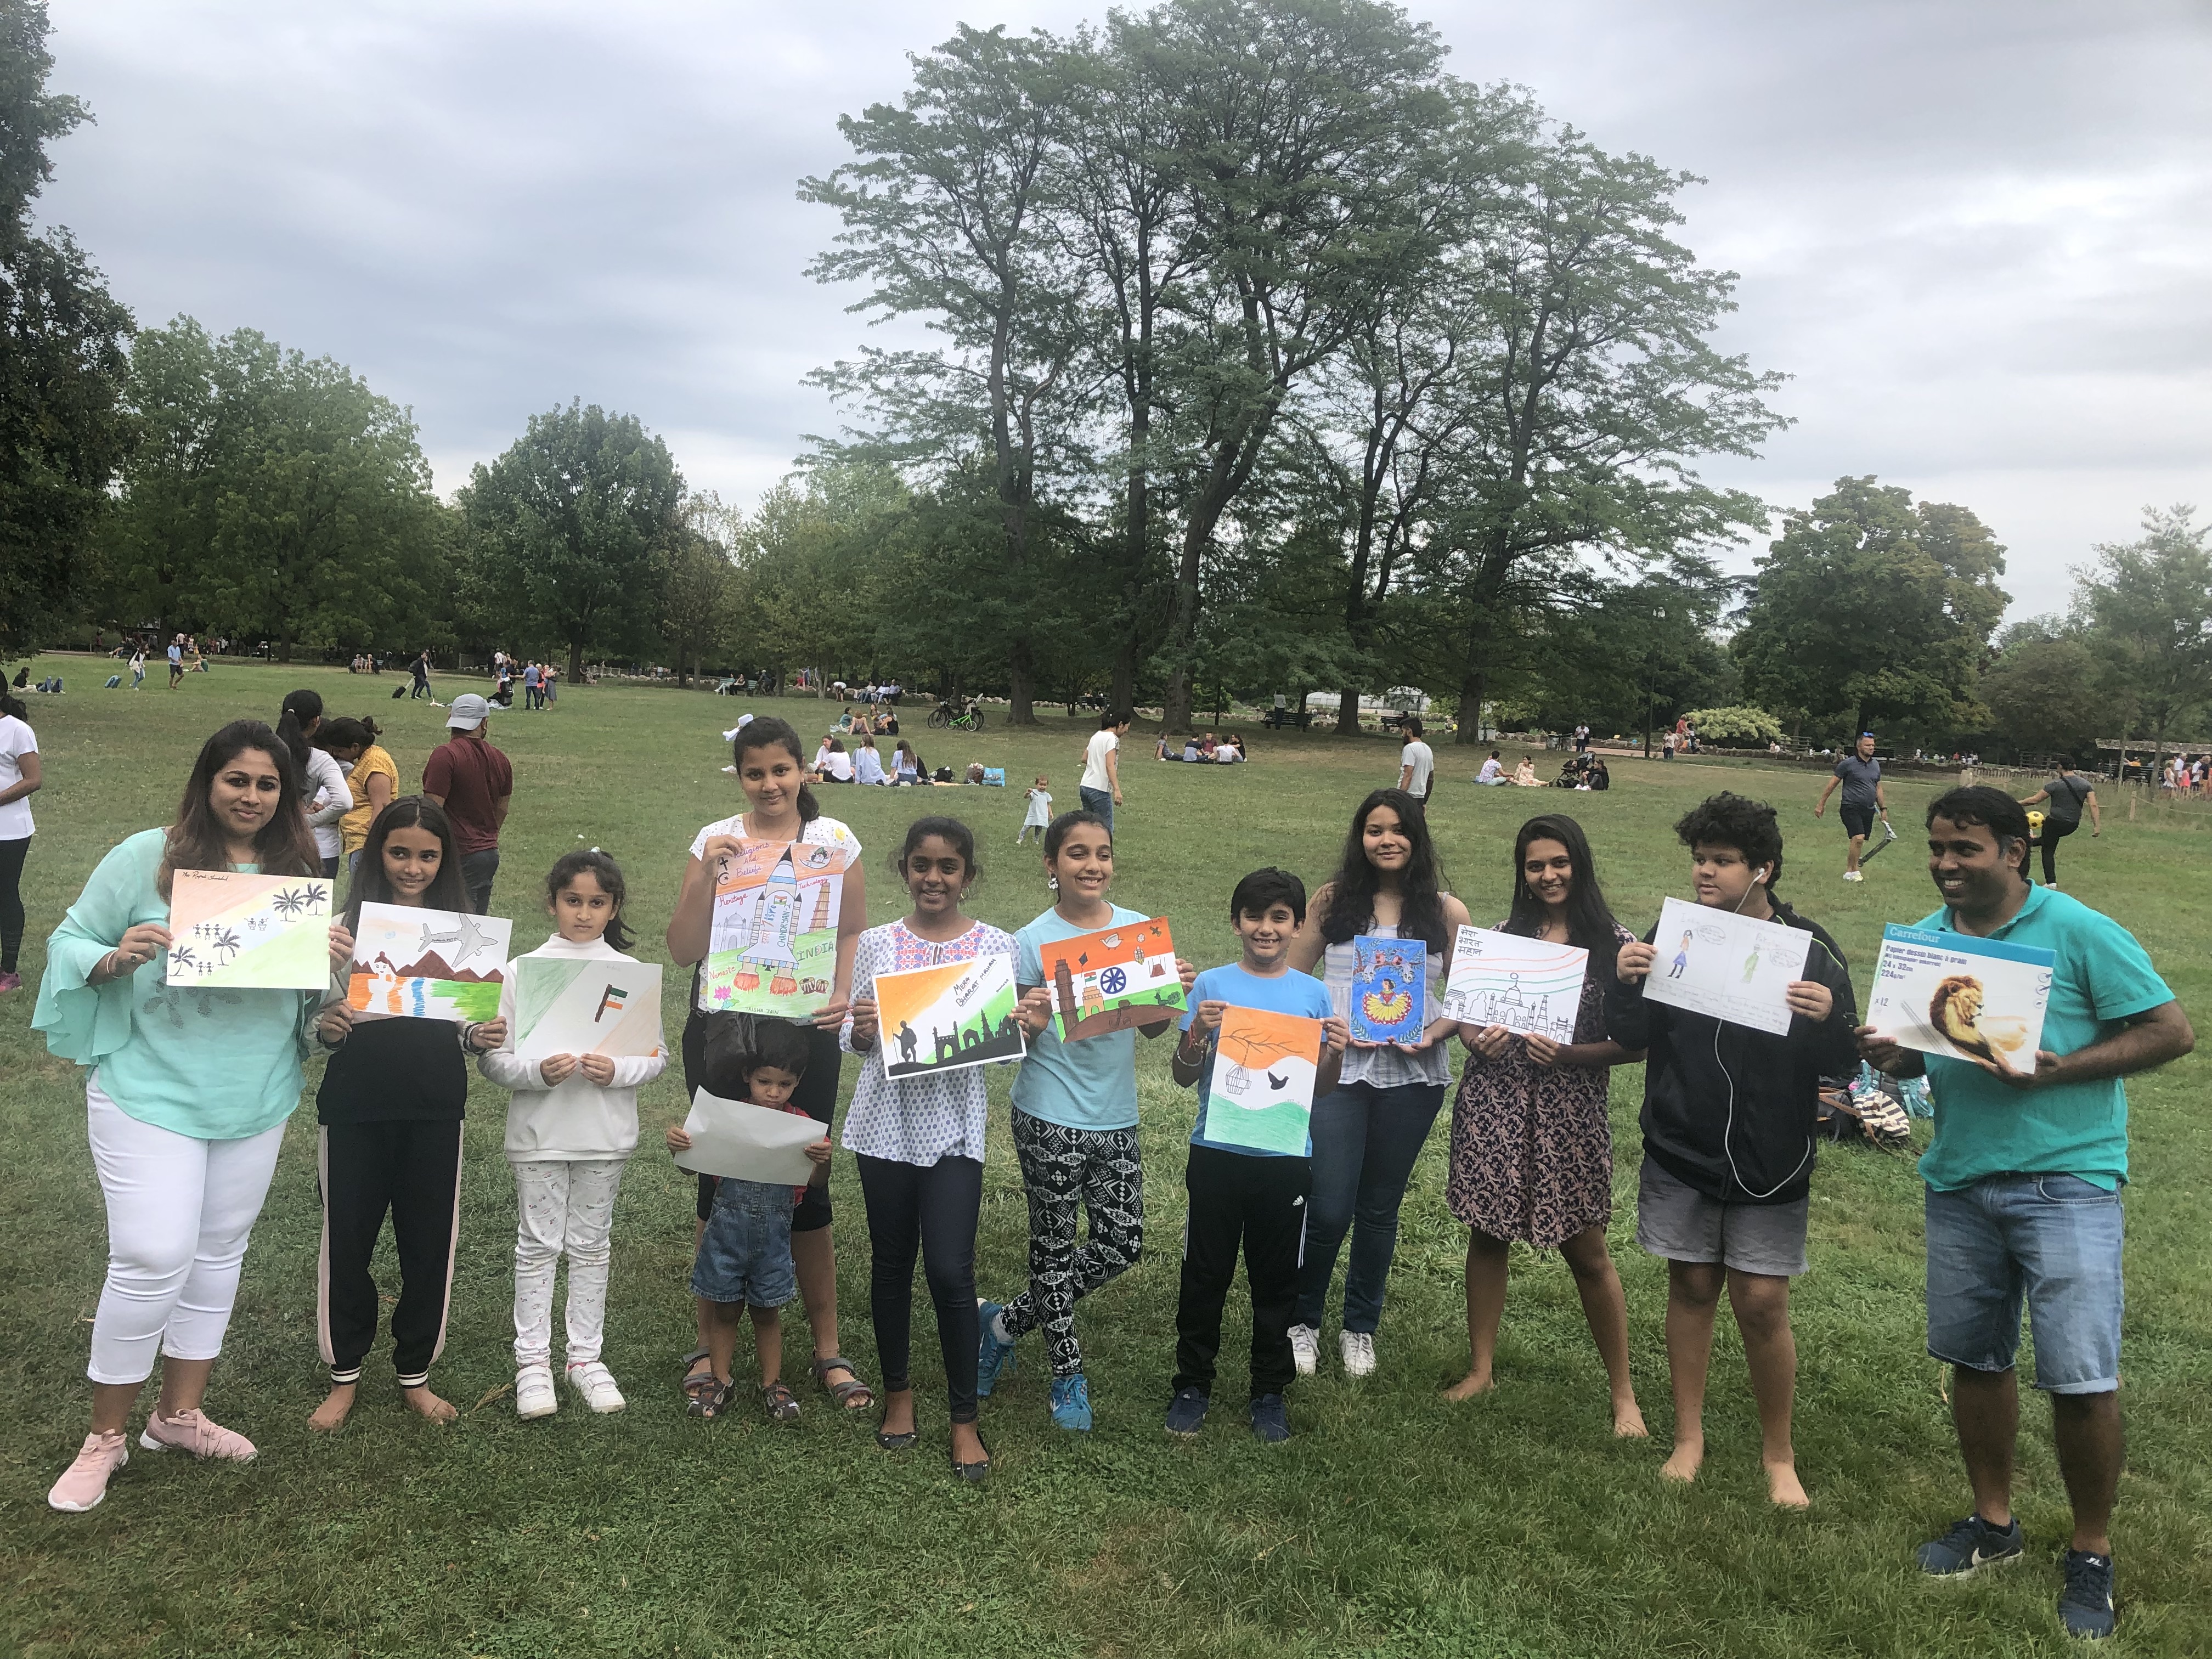 Painting workshop on “My wonderful India” in Lyon